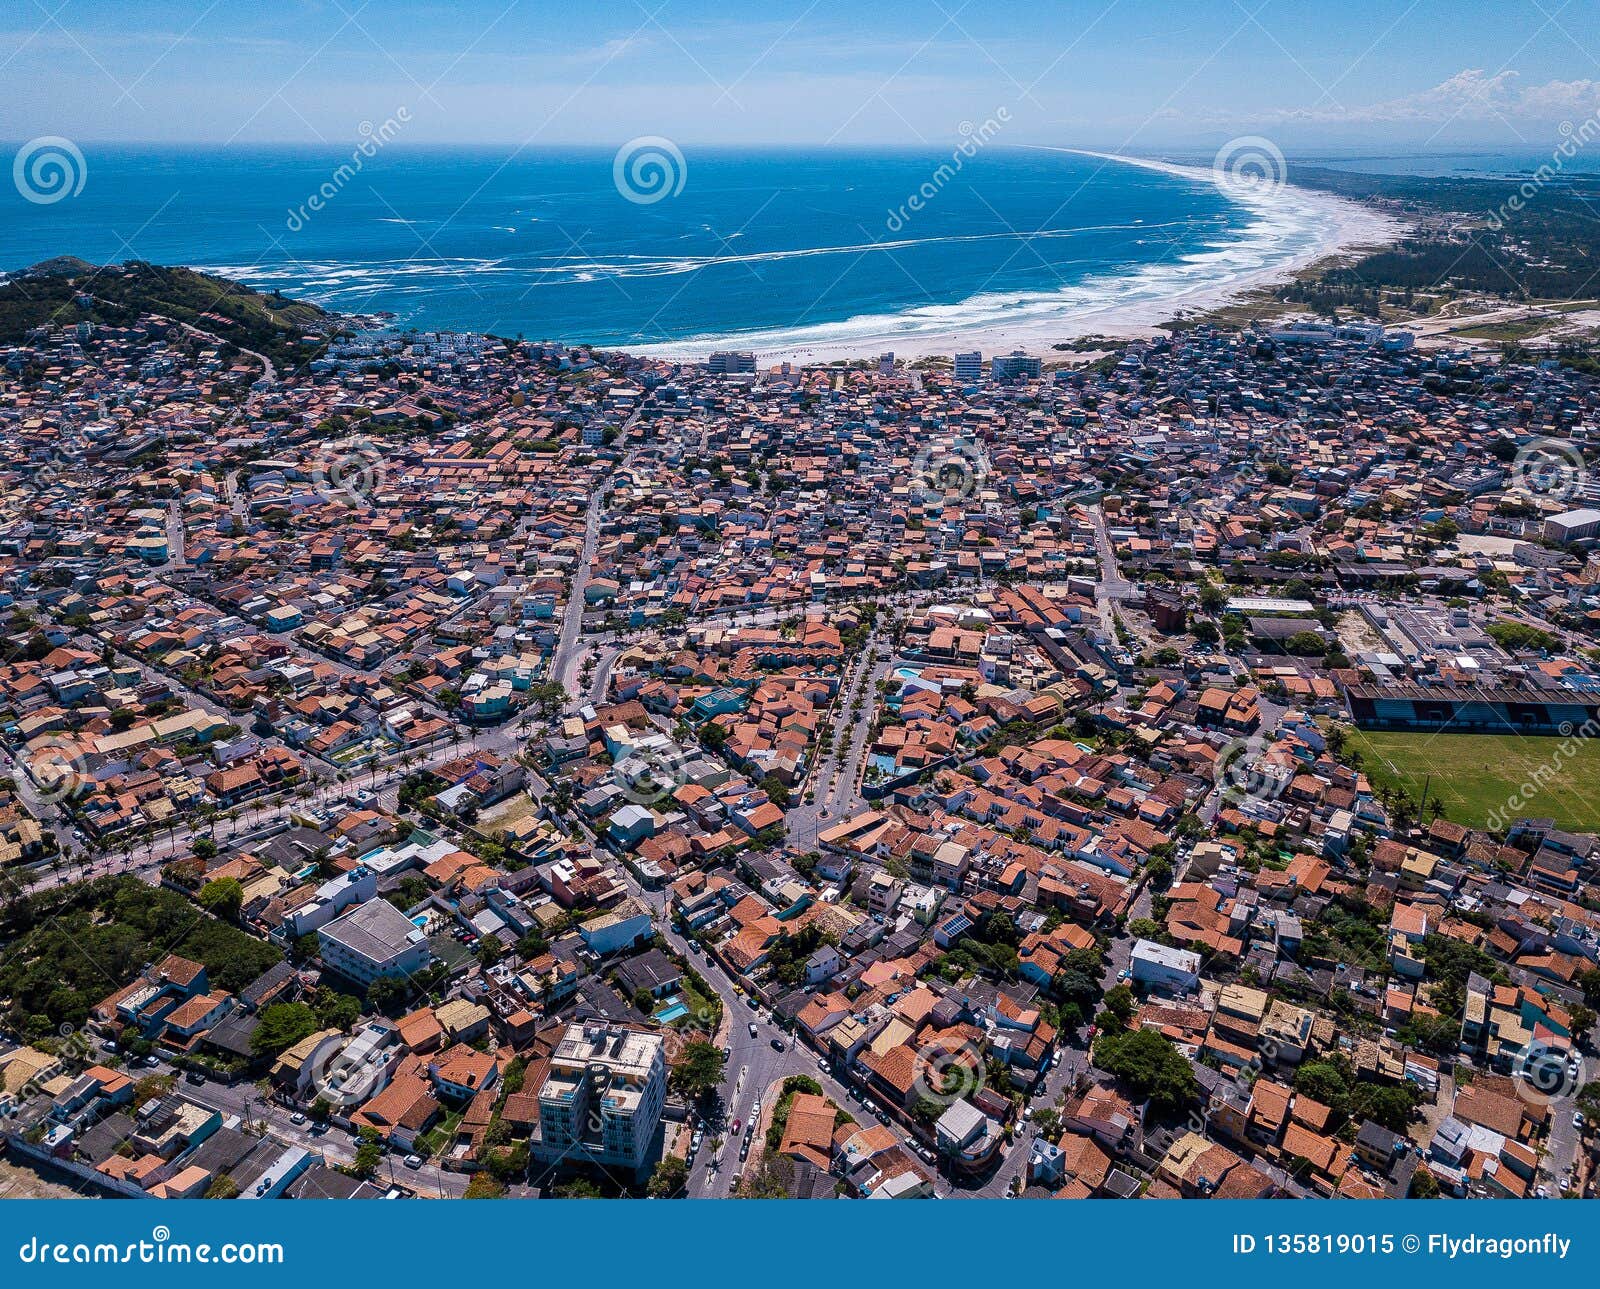 brazilian small beautiful city arraial do cabo . aerial drone photo from above city line. red roofs, narrow streets